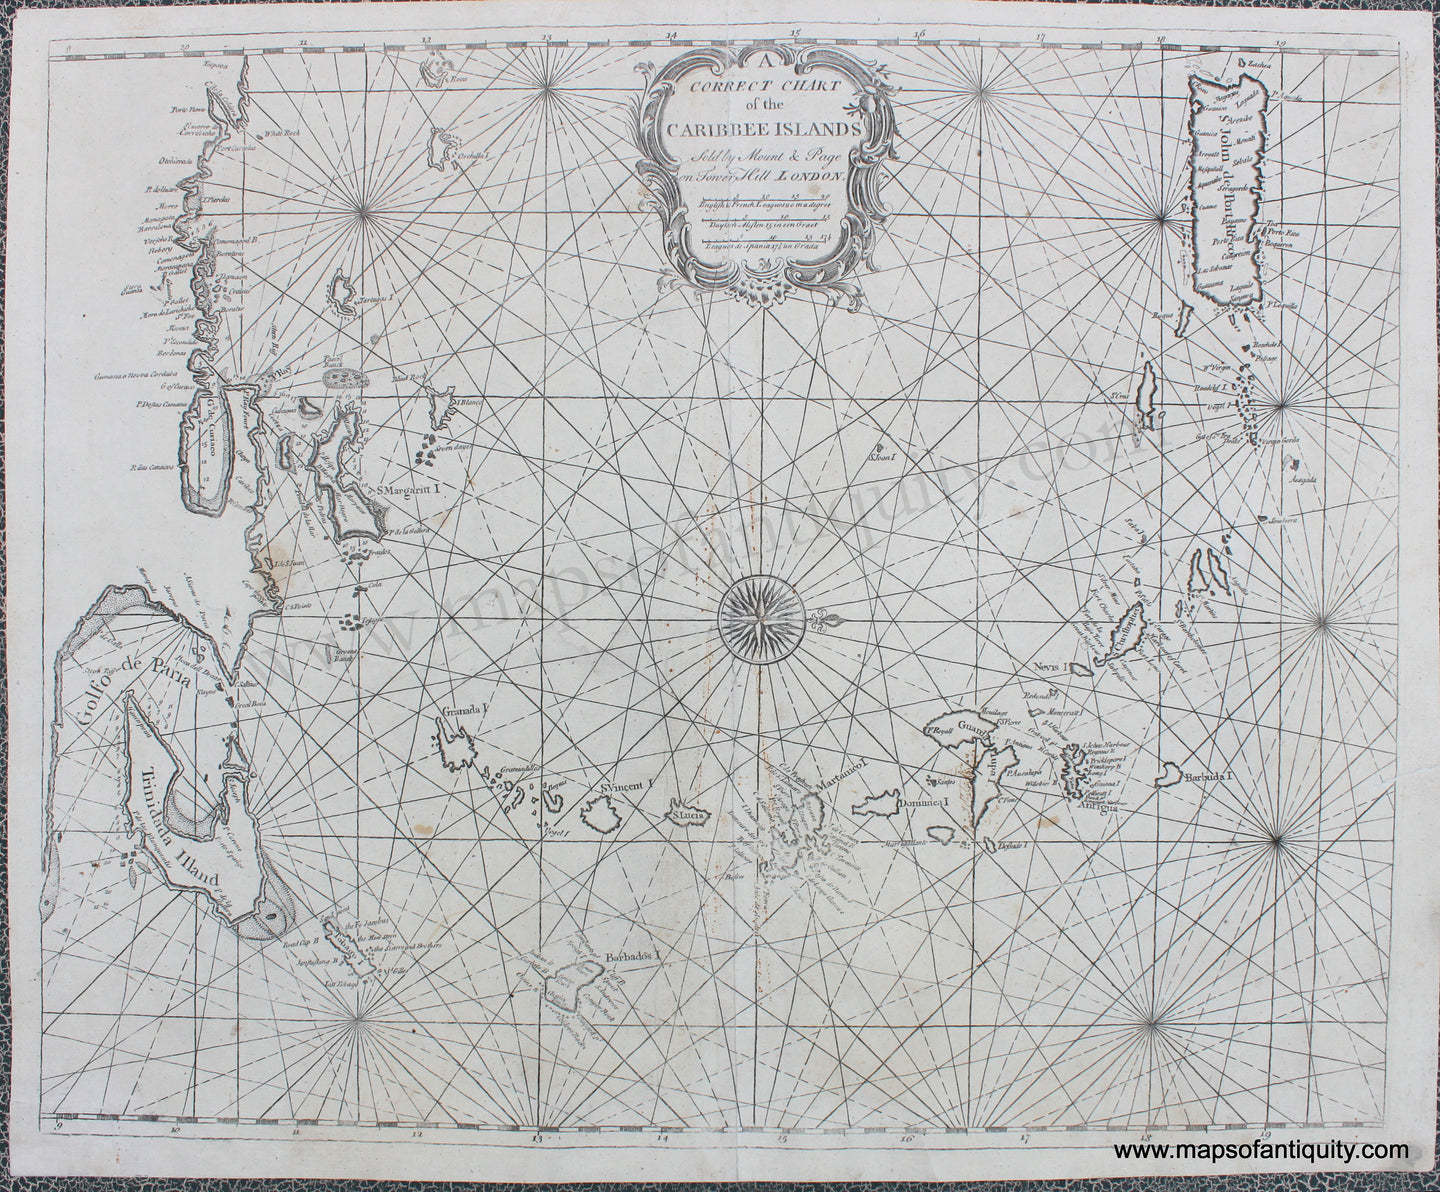 Genuine-Antique-Chart-A-Correct-Chart-of-the-Caribbee-Islands-1750-Mount-&-Page-Maps-Of-Antiquity